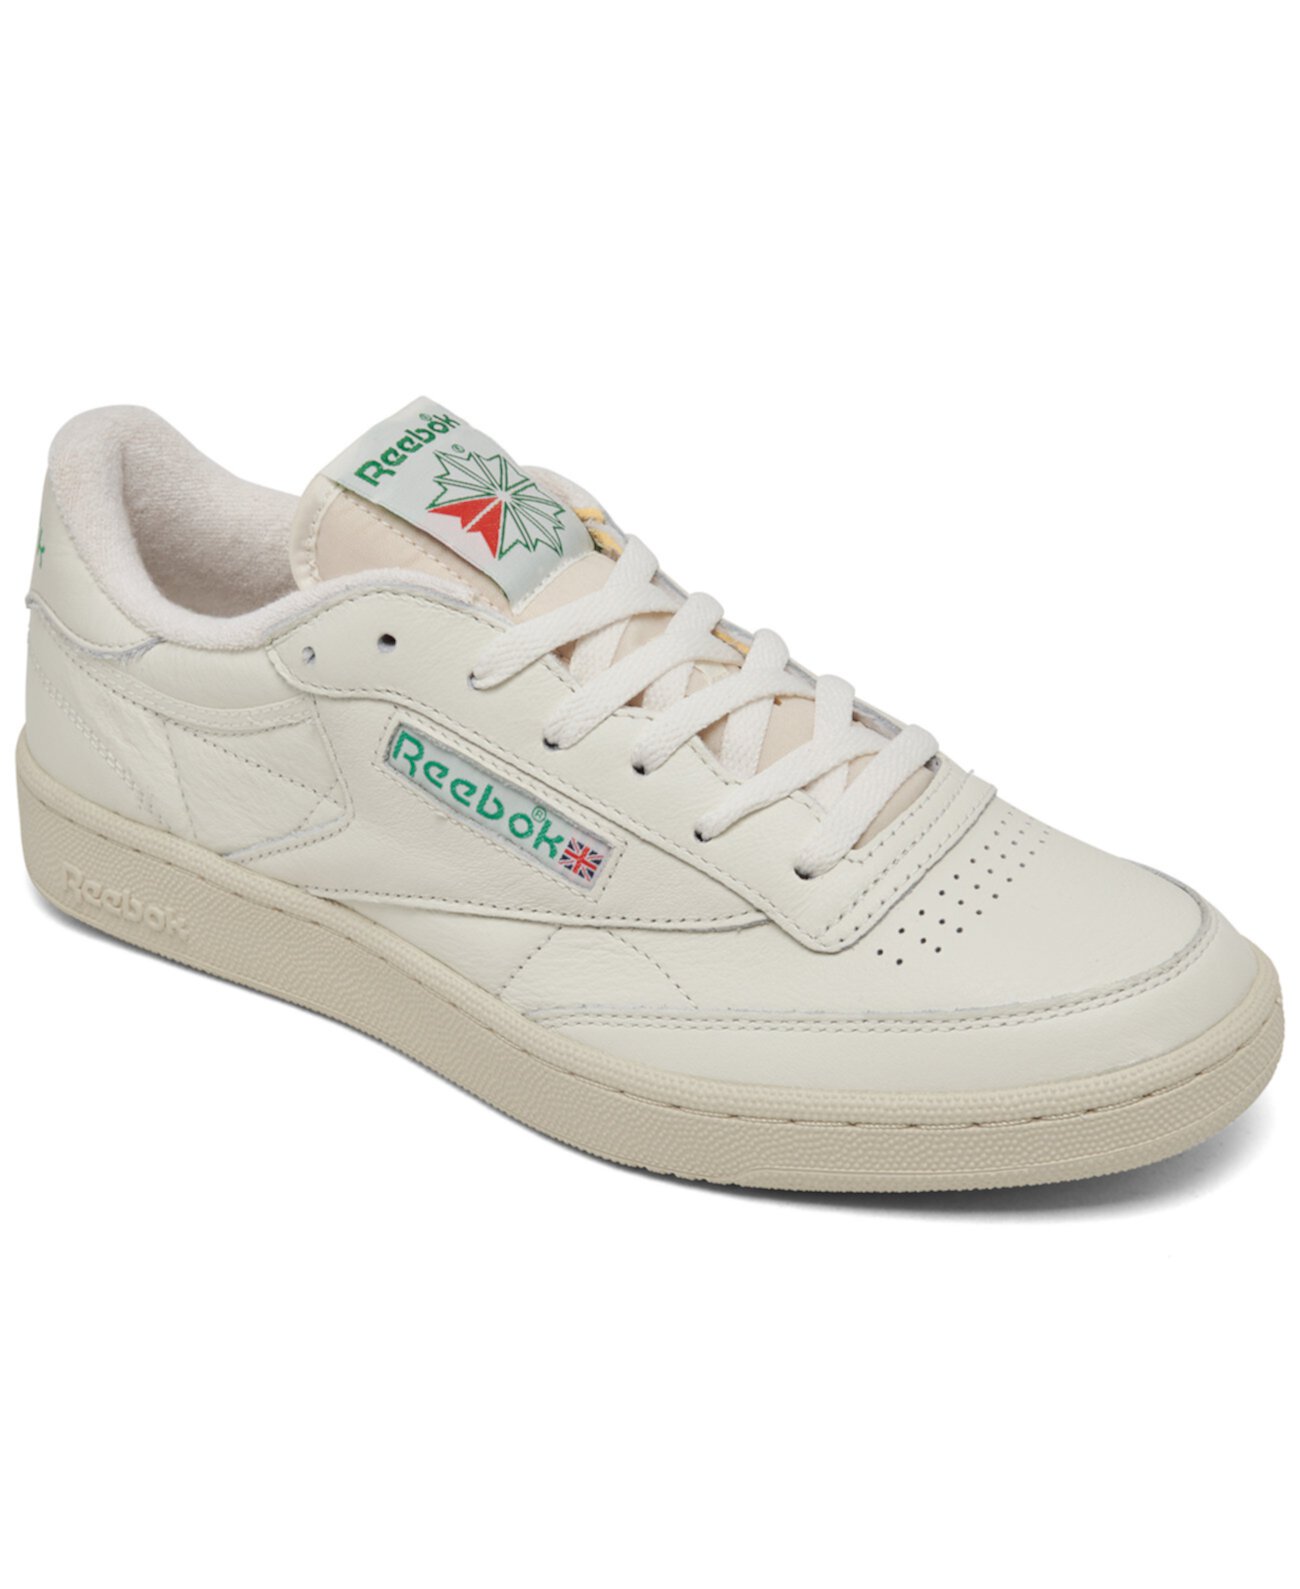 Men's Club C 85 Vintage-like Casual Sneakers from Finish Line Reebok